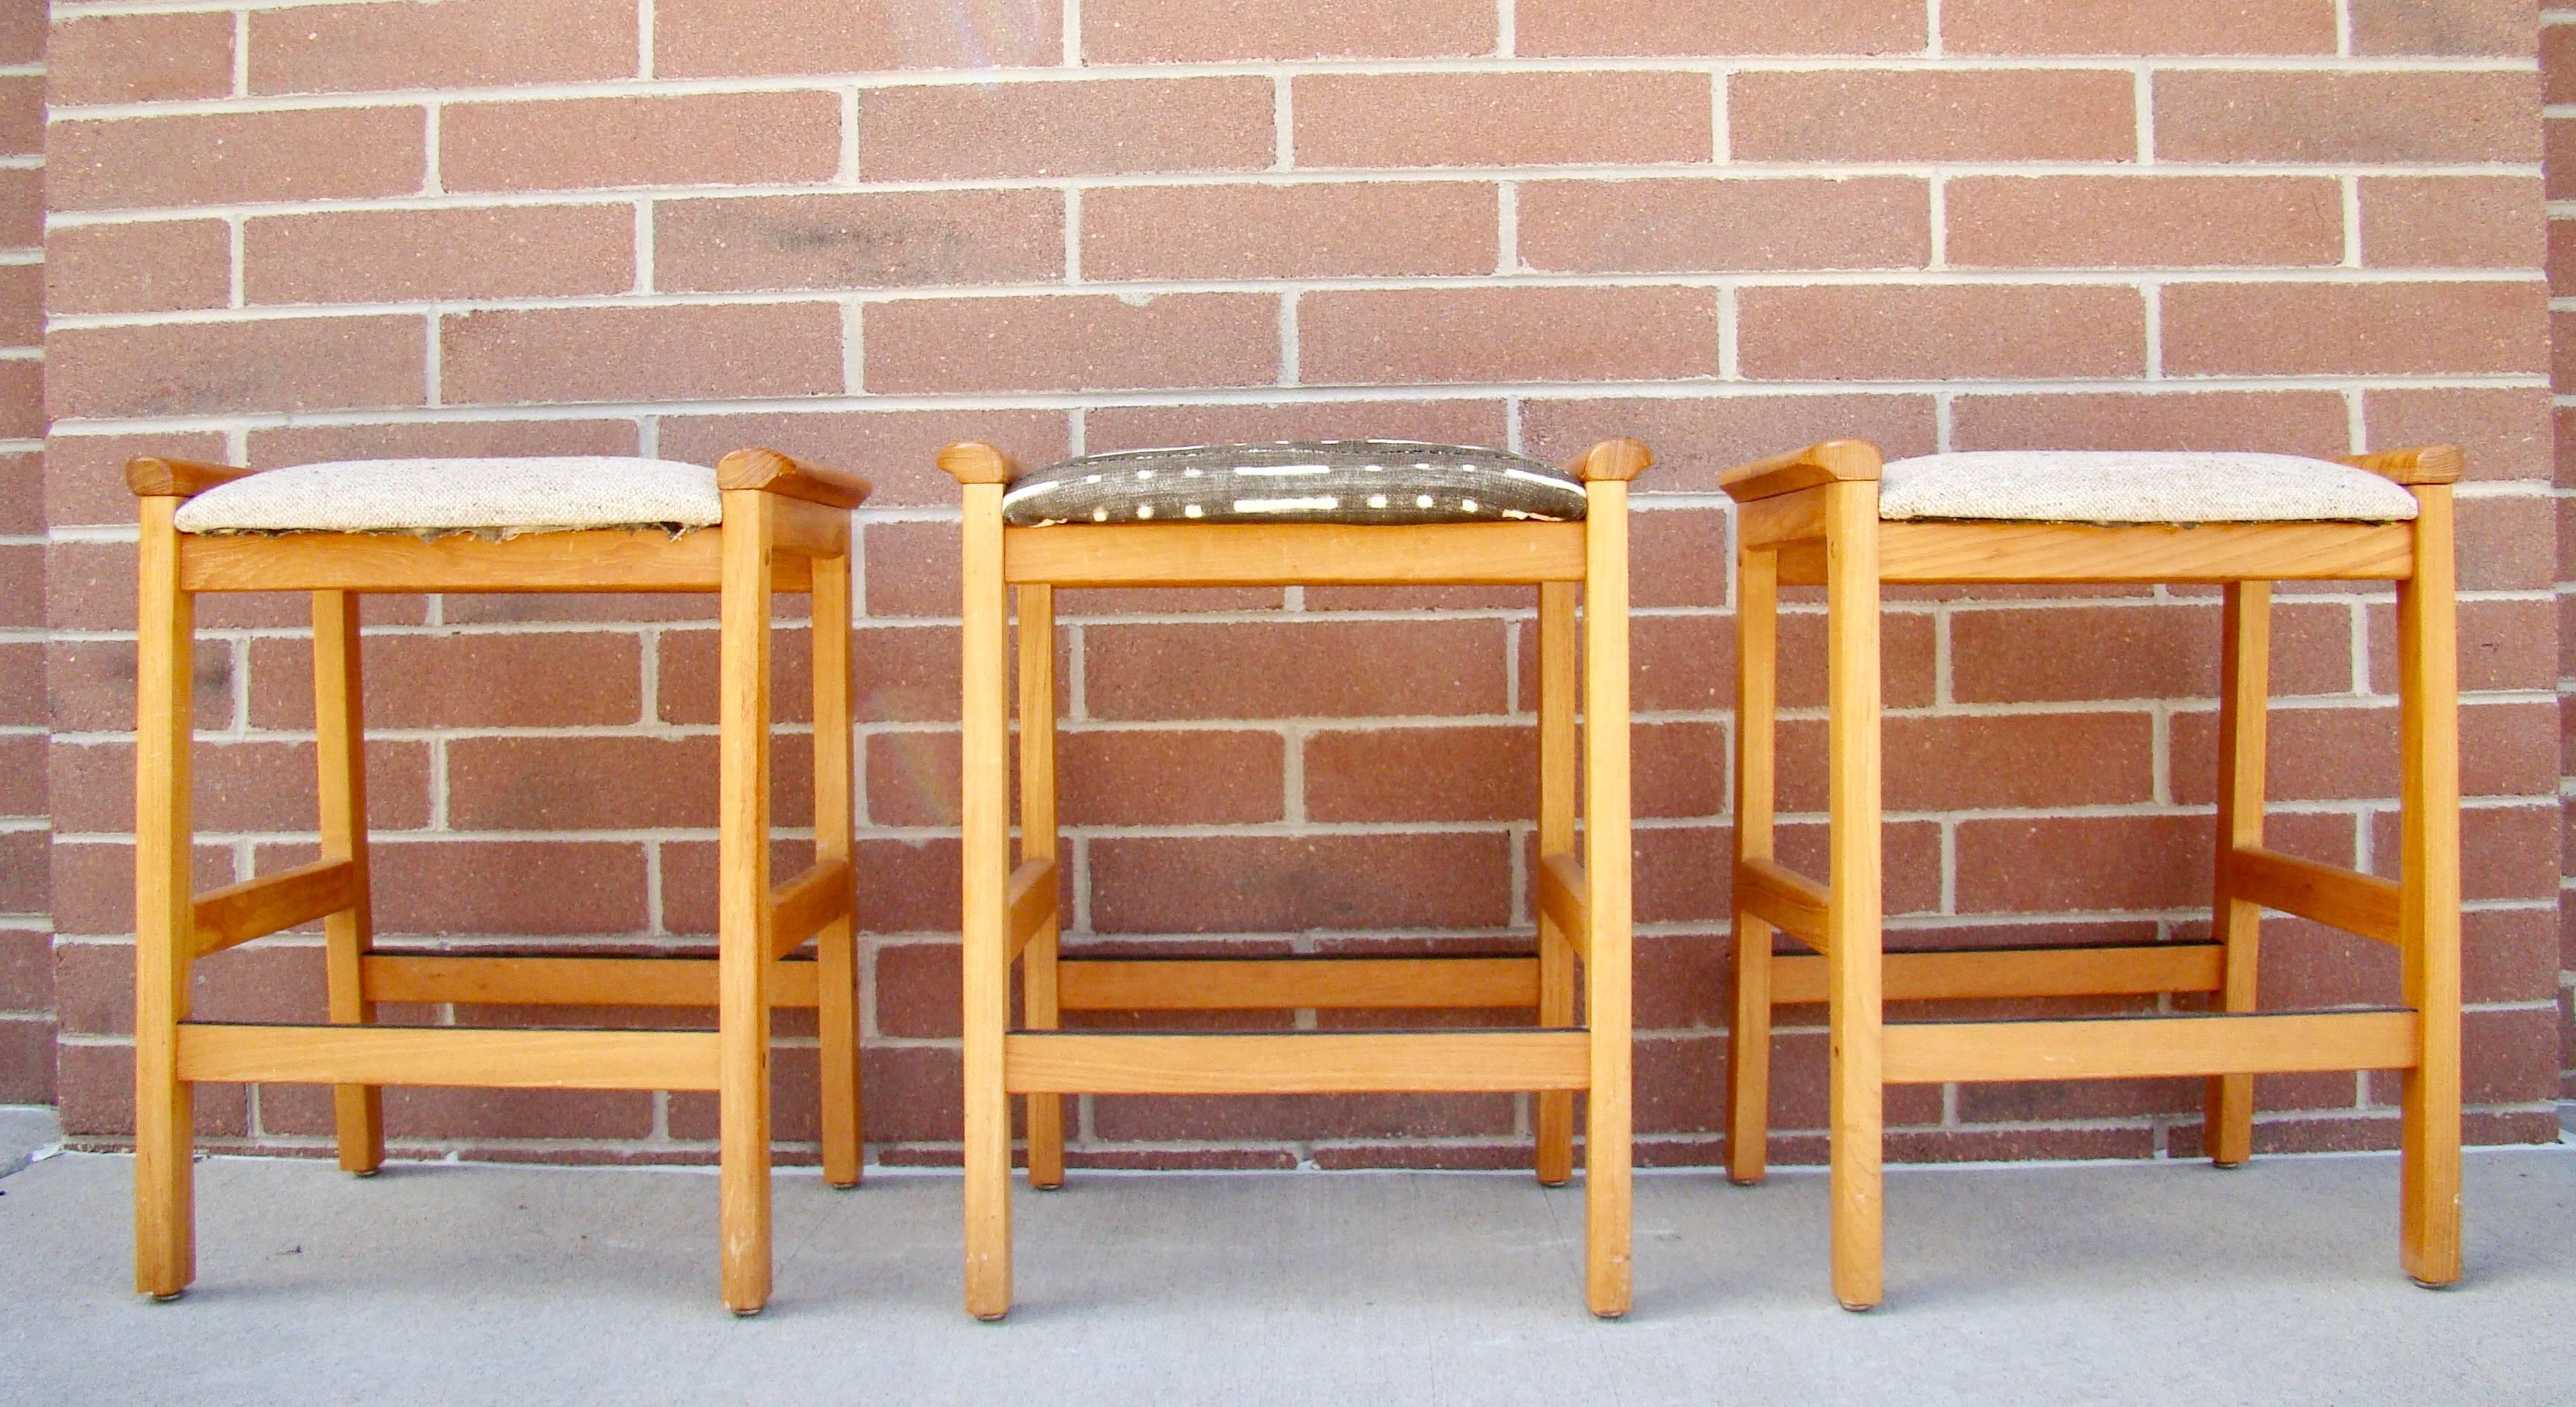 Counter height teak bar stools by J. L. Moller Hojbjerg Denmark. Marked with a paper label on the underside.